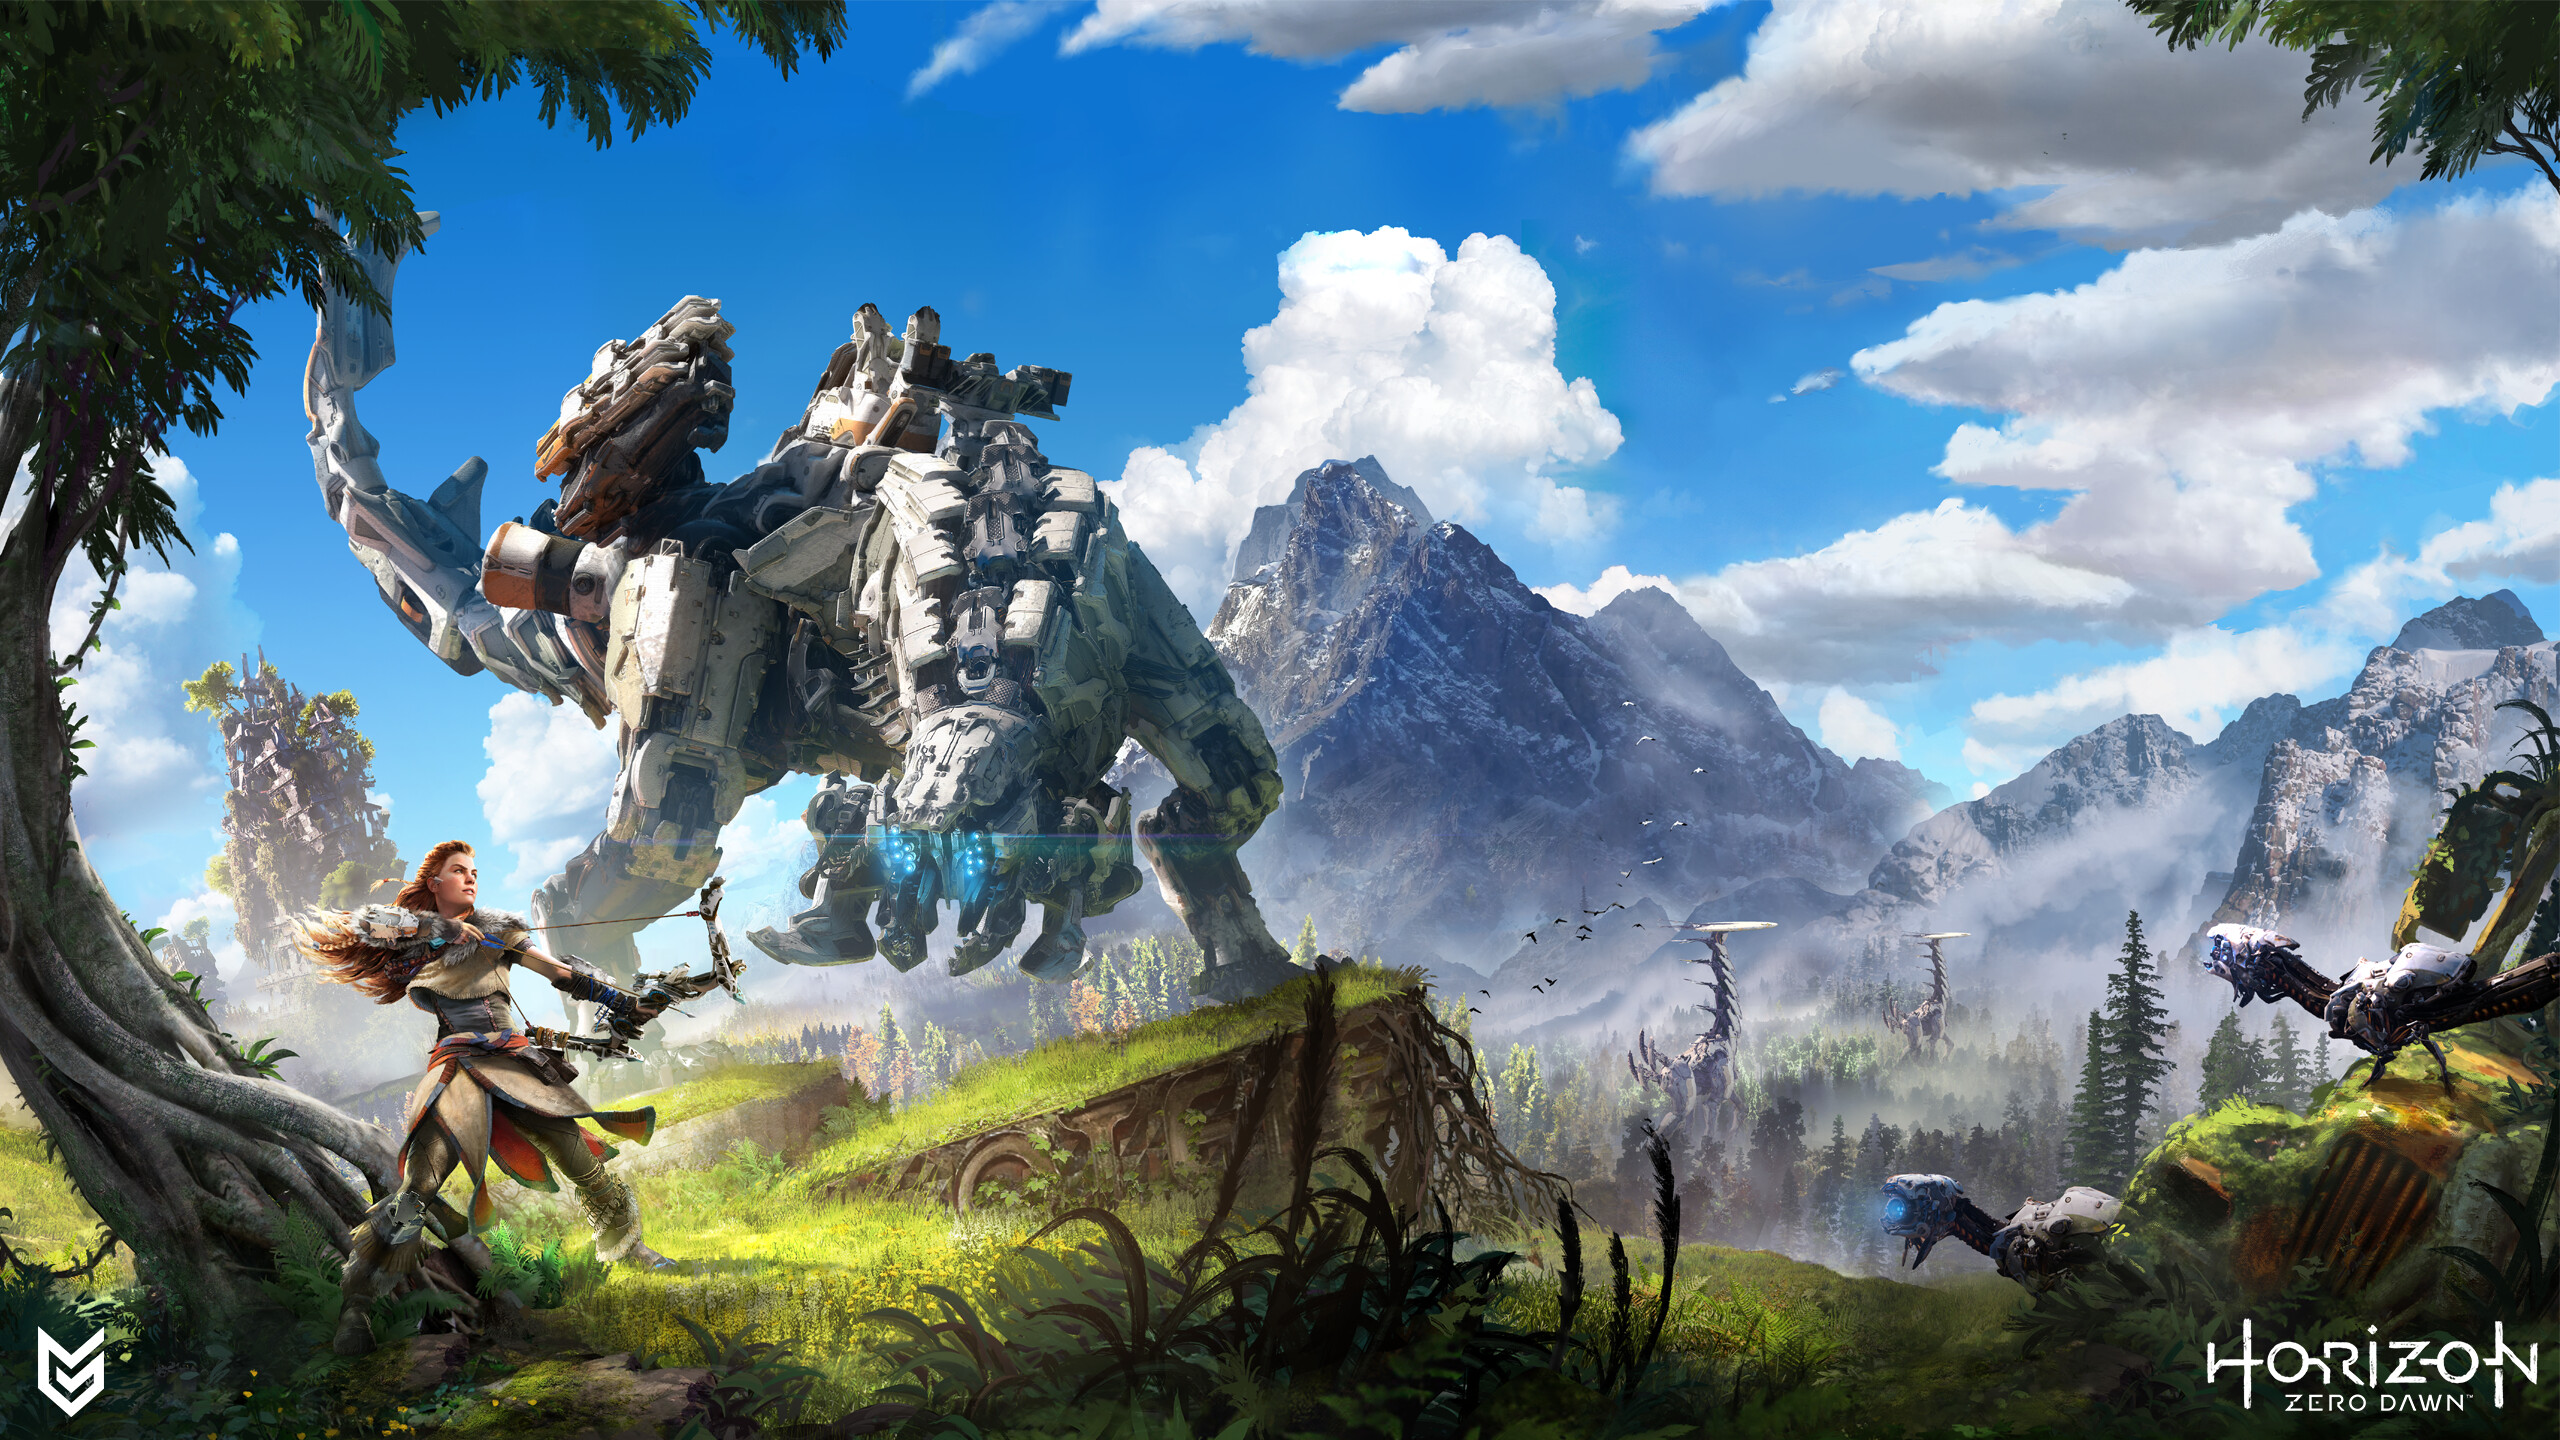 Horizon Zero Dawn: Aloy, a skilled hunter, exploring a vibrant and lush world inhabited by mysterious mechanized creatures. 2560x1440 HD Background.